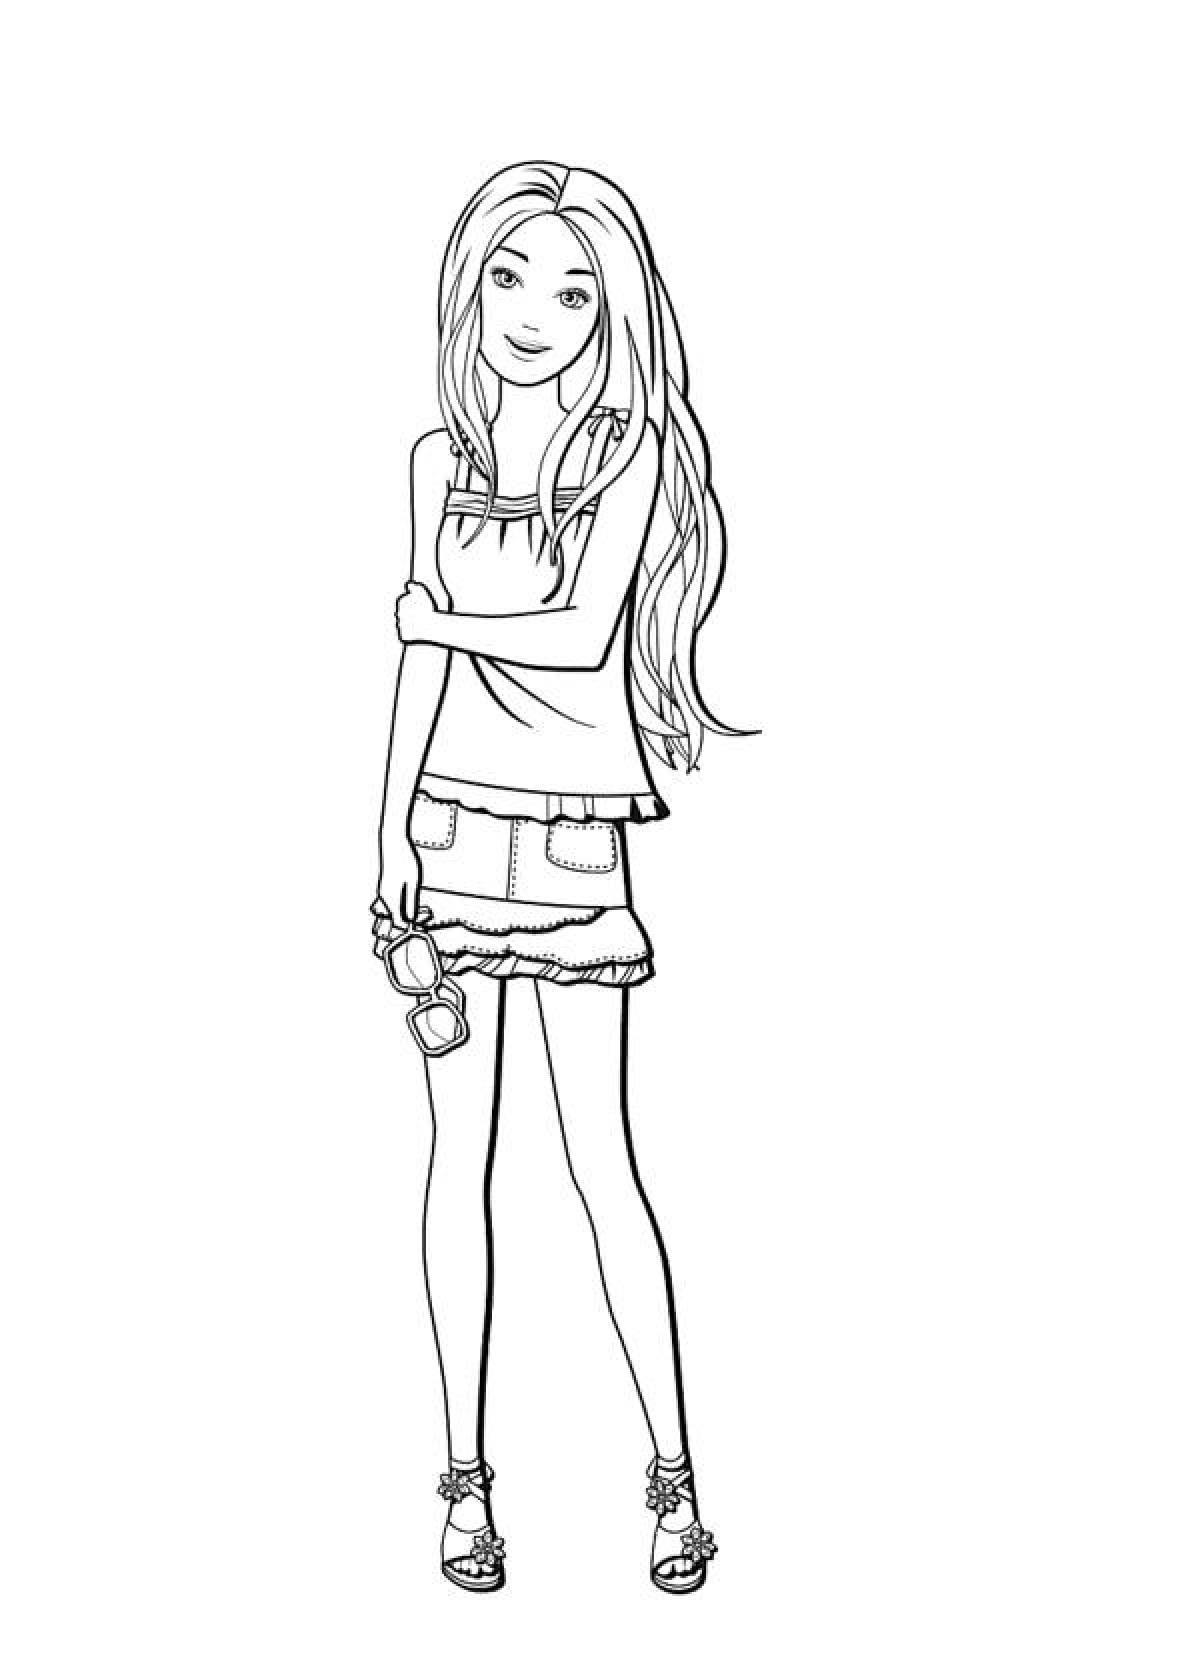 Vivacious coloring page full body girl